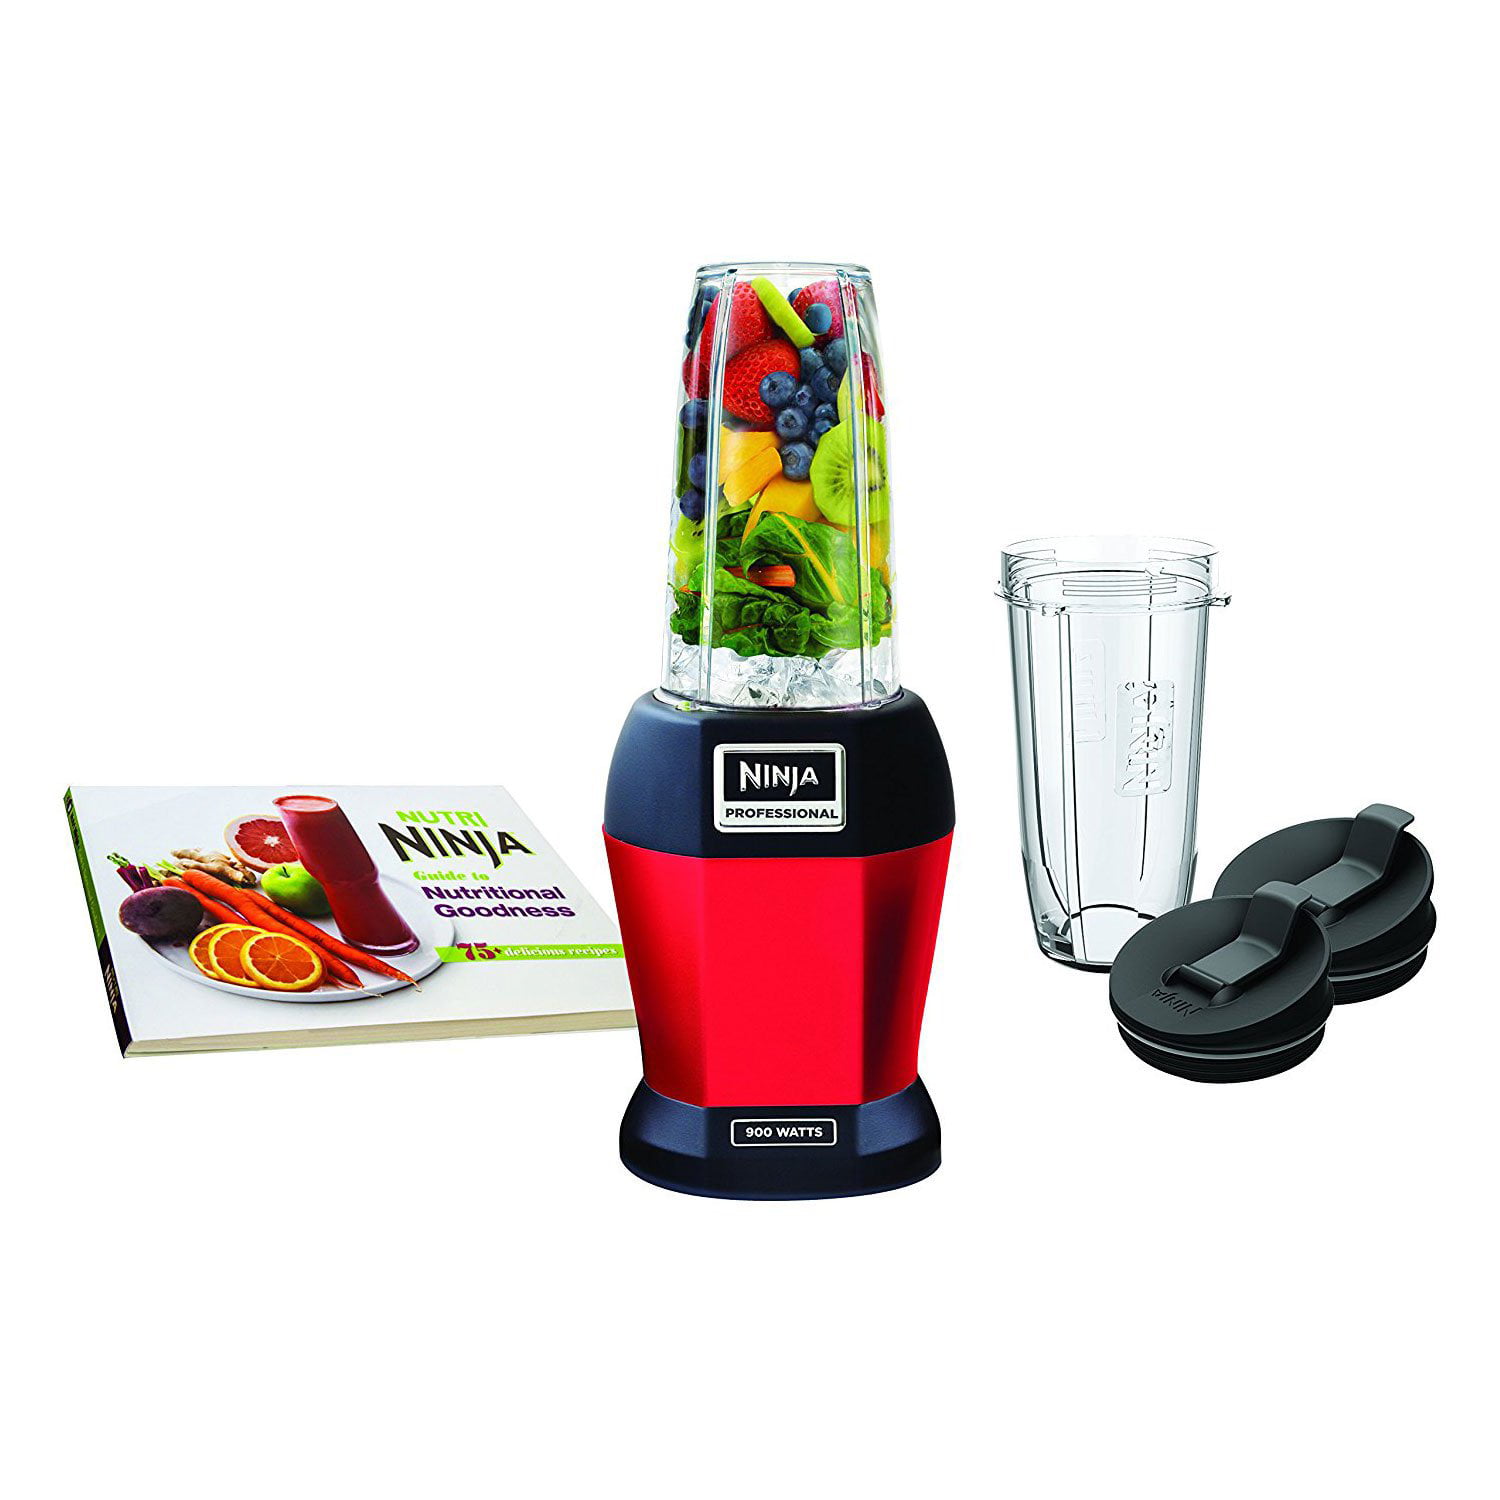 Rosewill Professional Blender for Smoothies, Ice Crushing & F